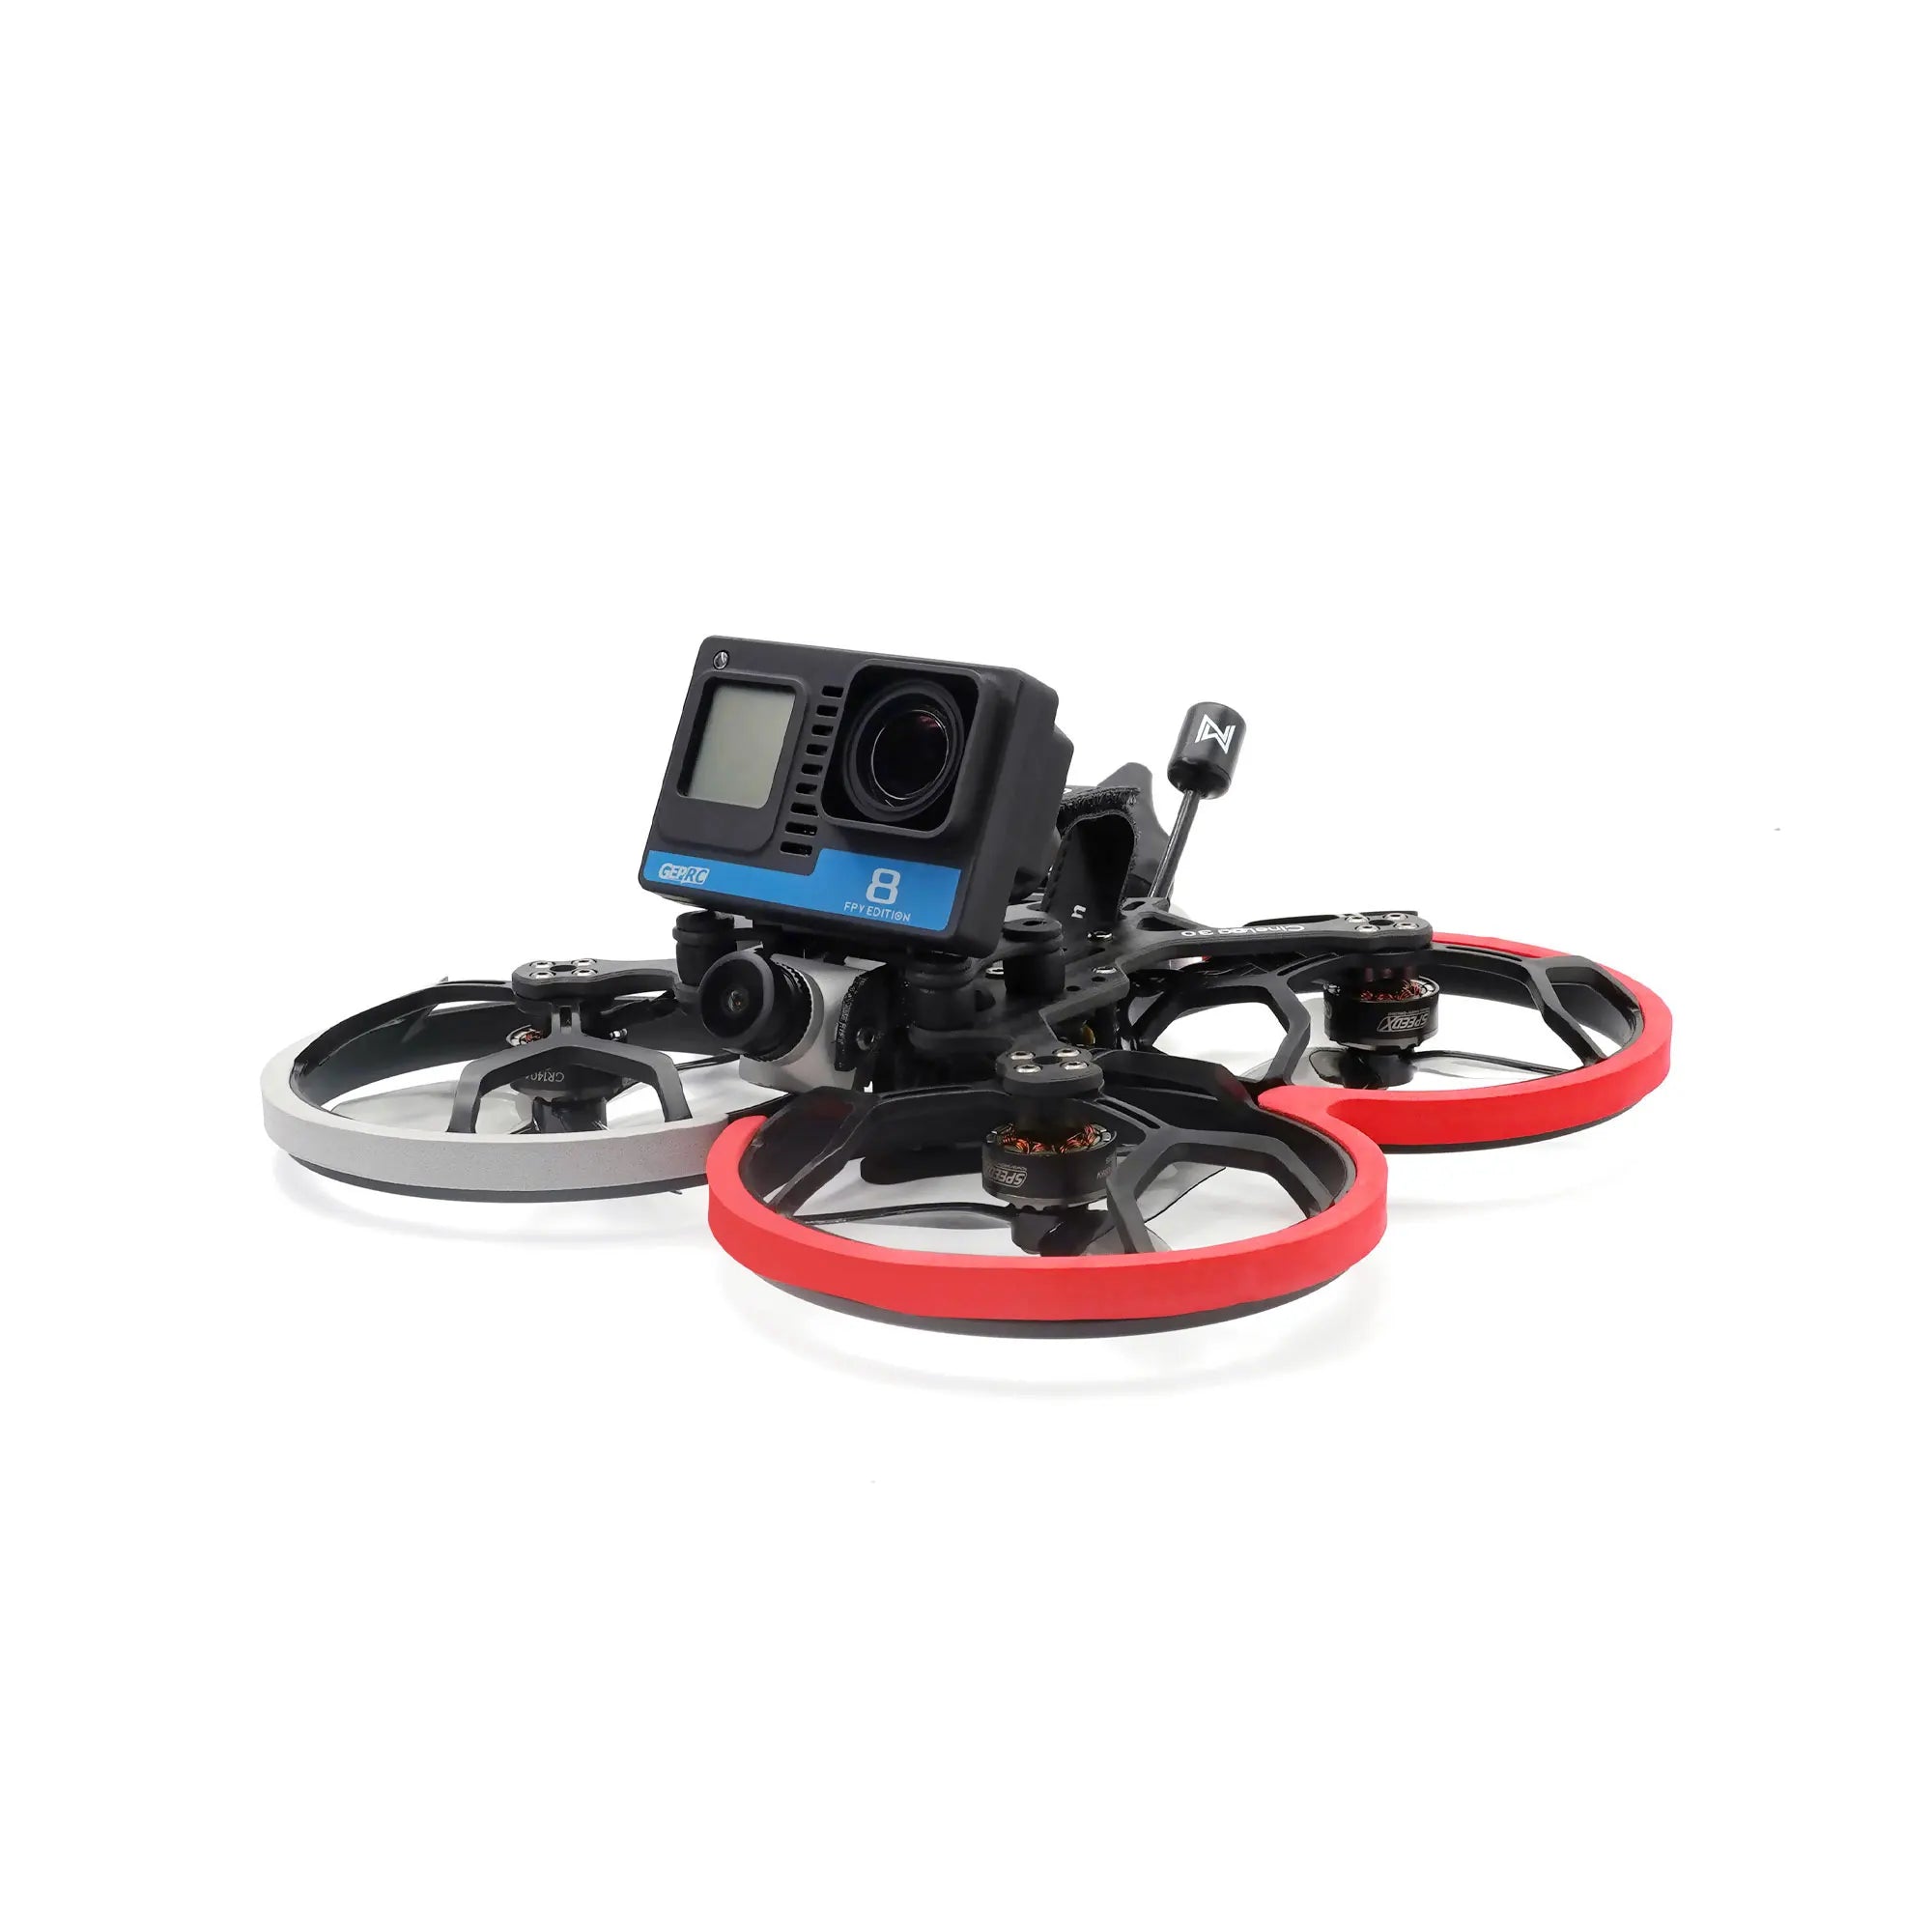 GEPRC CineLog30 HD FPV, the customer must get warranty support directly from the 3rd party company Purchasing Matters 